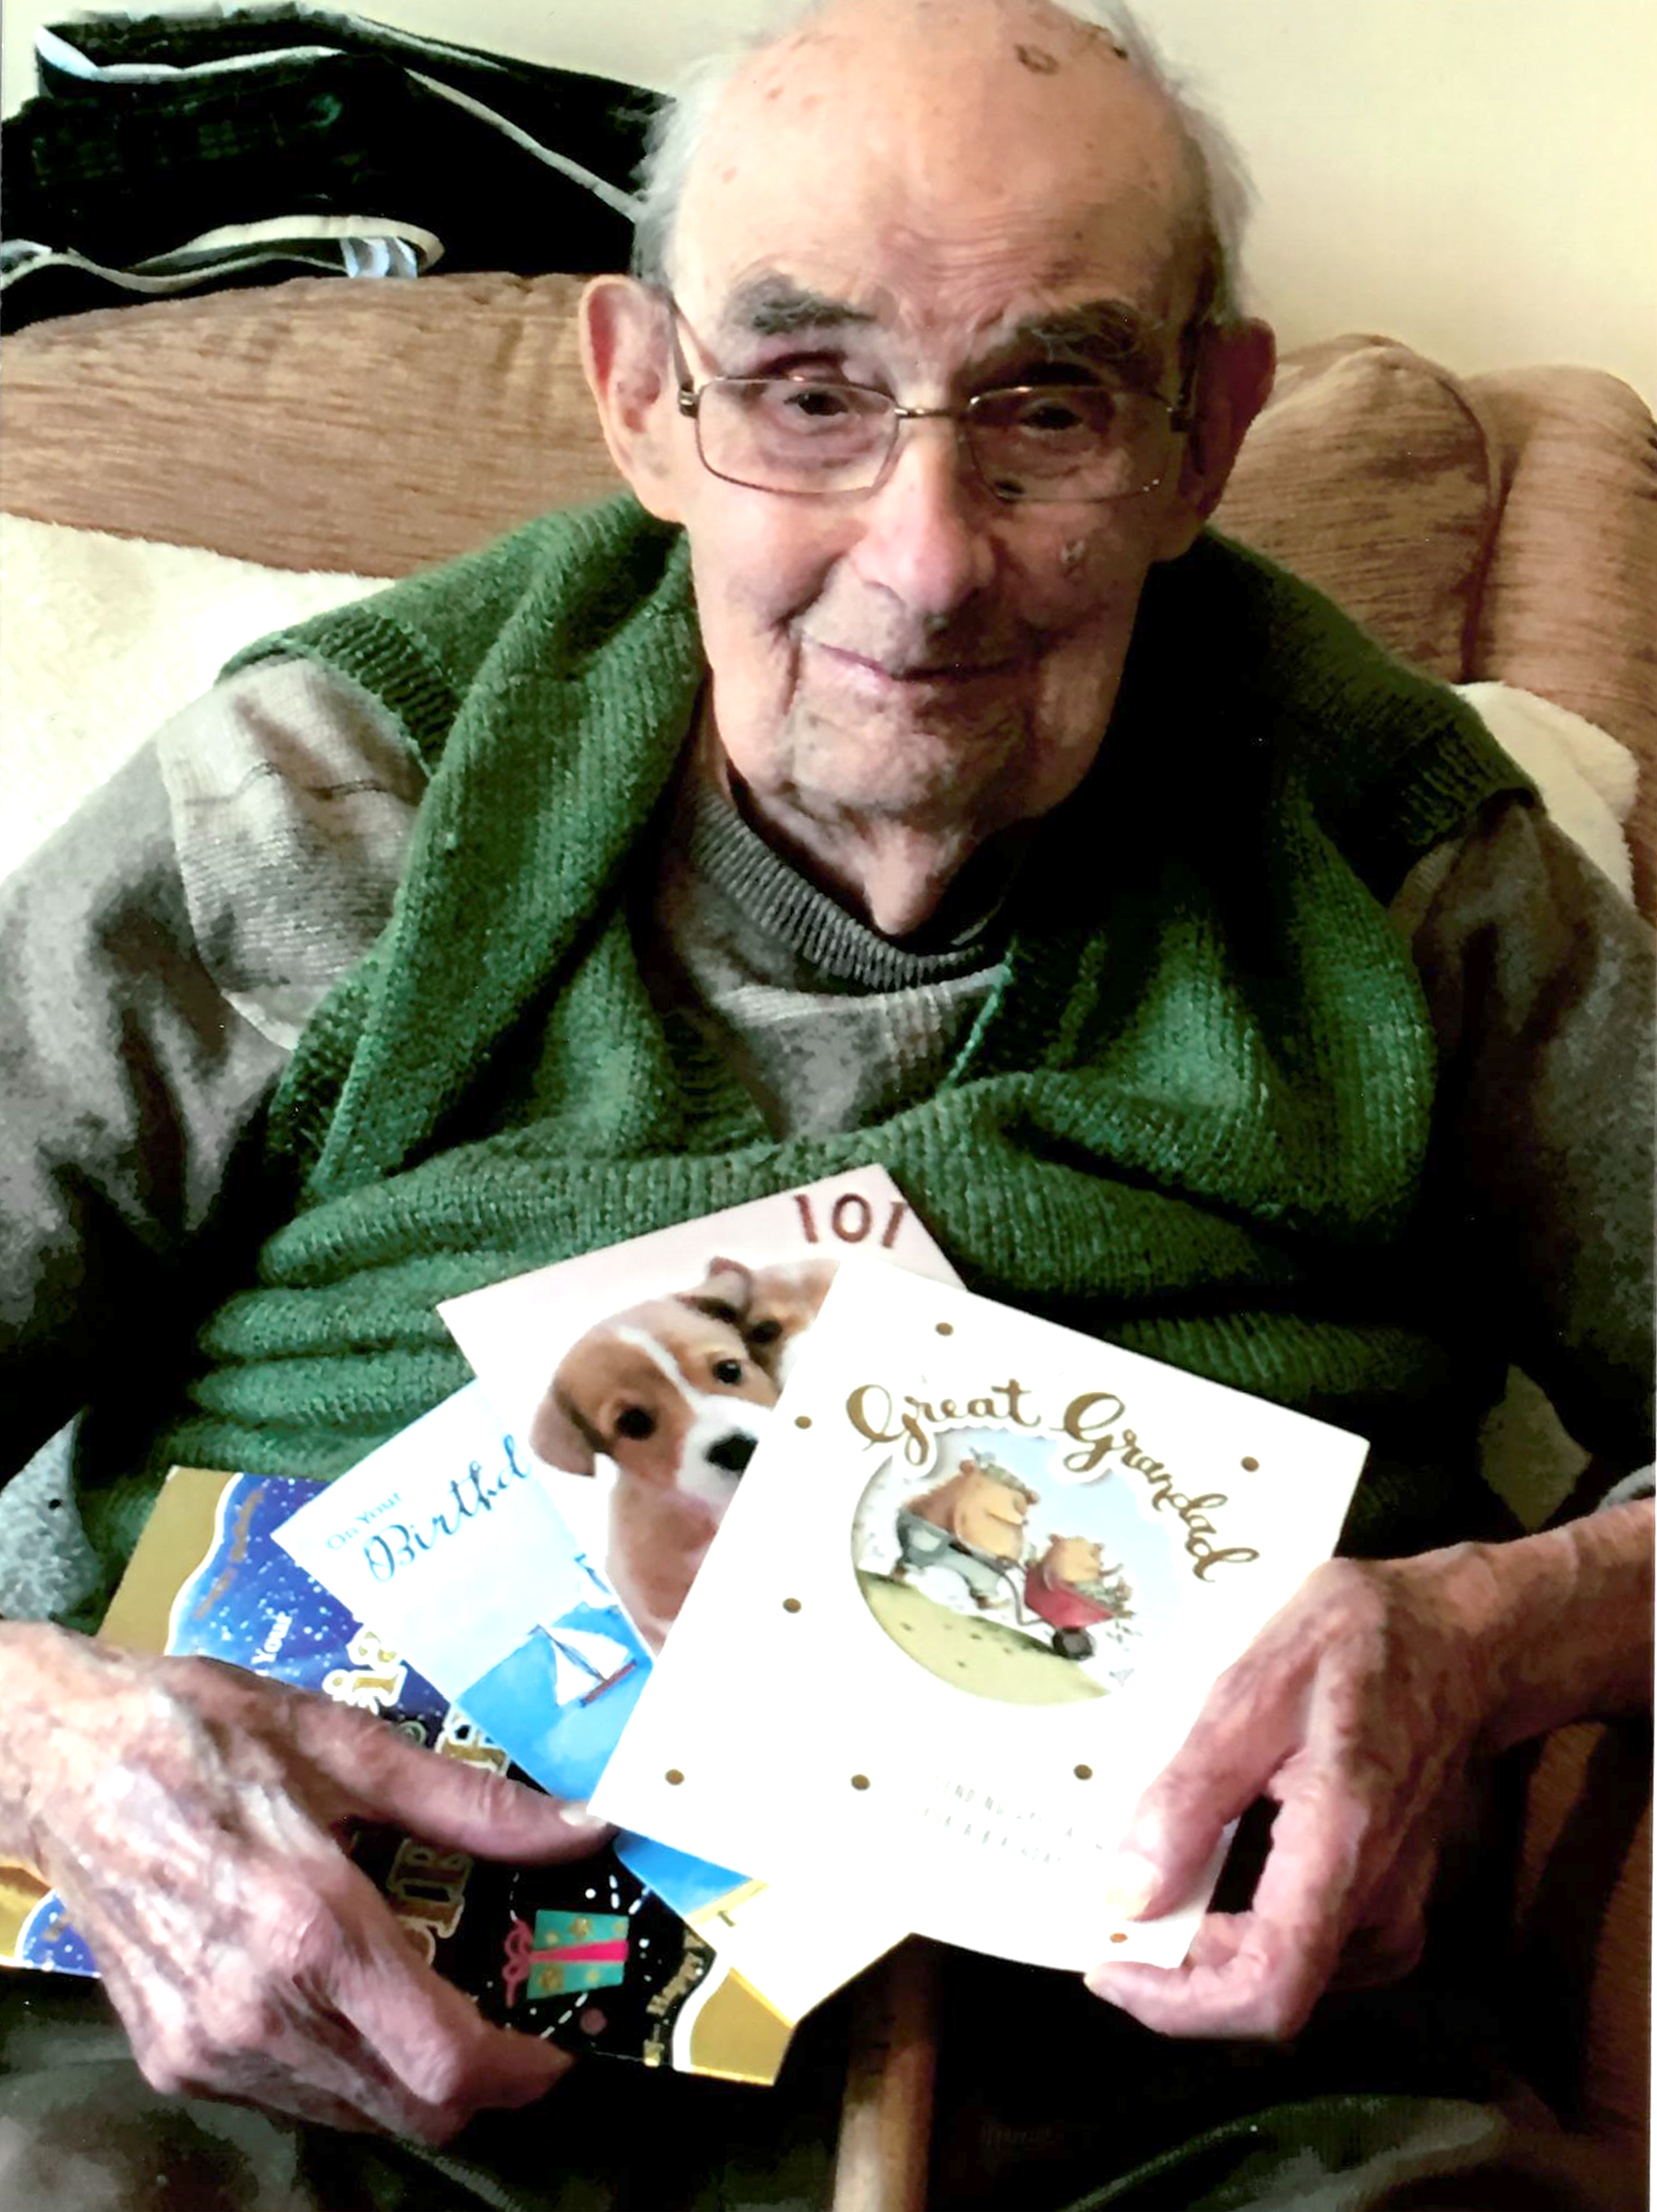 Bield tenant celebrates a life well lived at 101